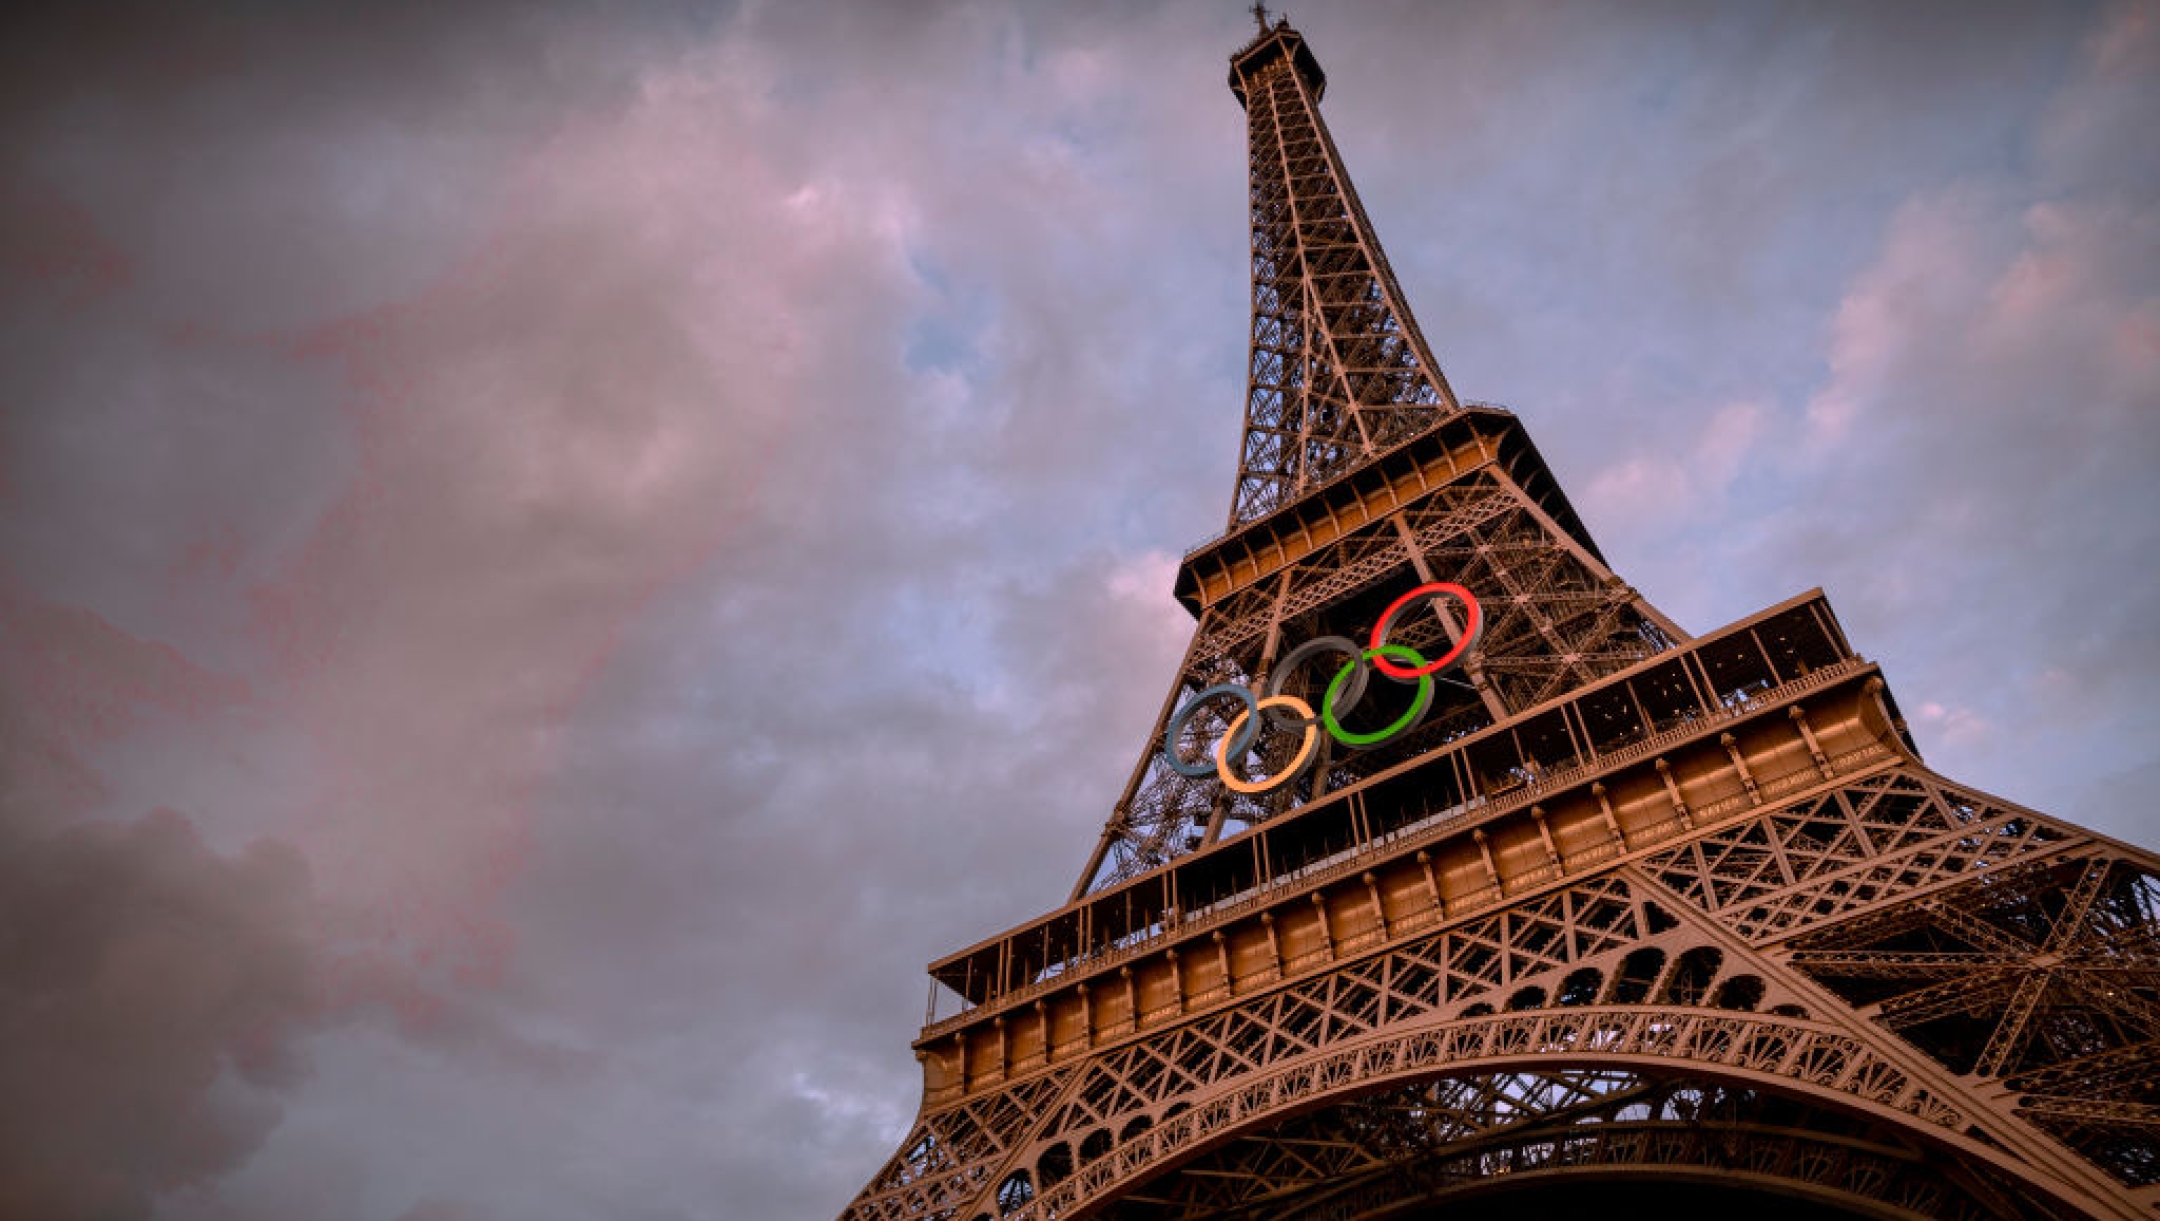 PARIS, FRANCE - JUNE 12: The Olympic rings are seen on the Eiffel Tower ahead of the start of the Paris 2024 Olympic Games on June 12, 2024 in Paris, France. The 2024 Summer Olympic Games begin on July 26. (Photo by Kiran Ridley/Getty Images)